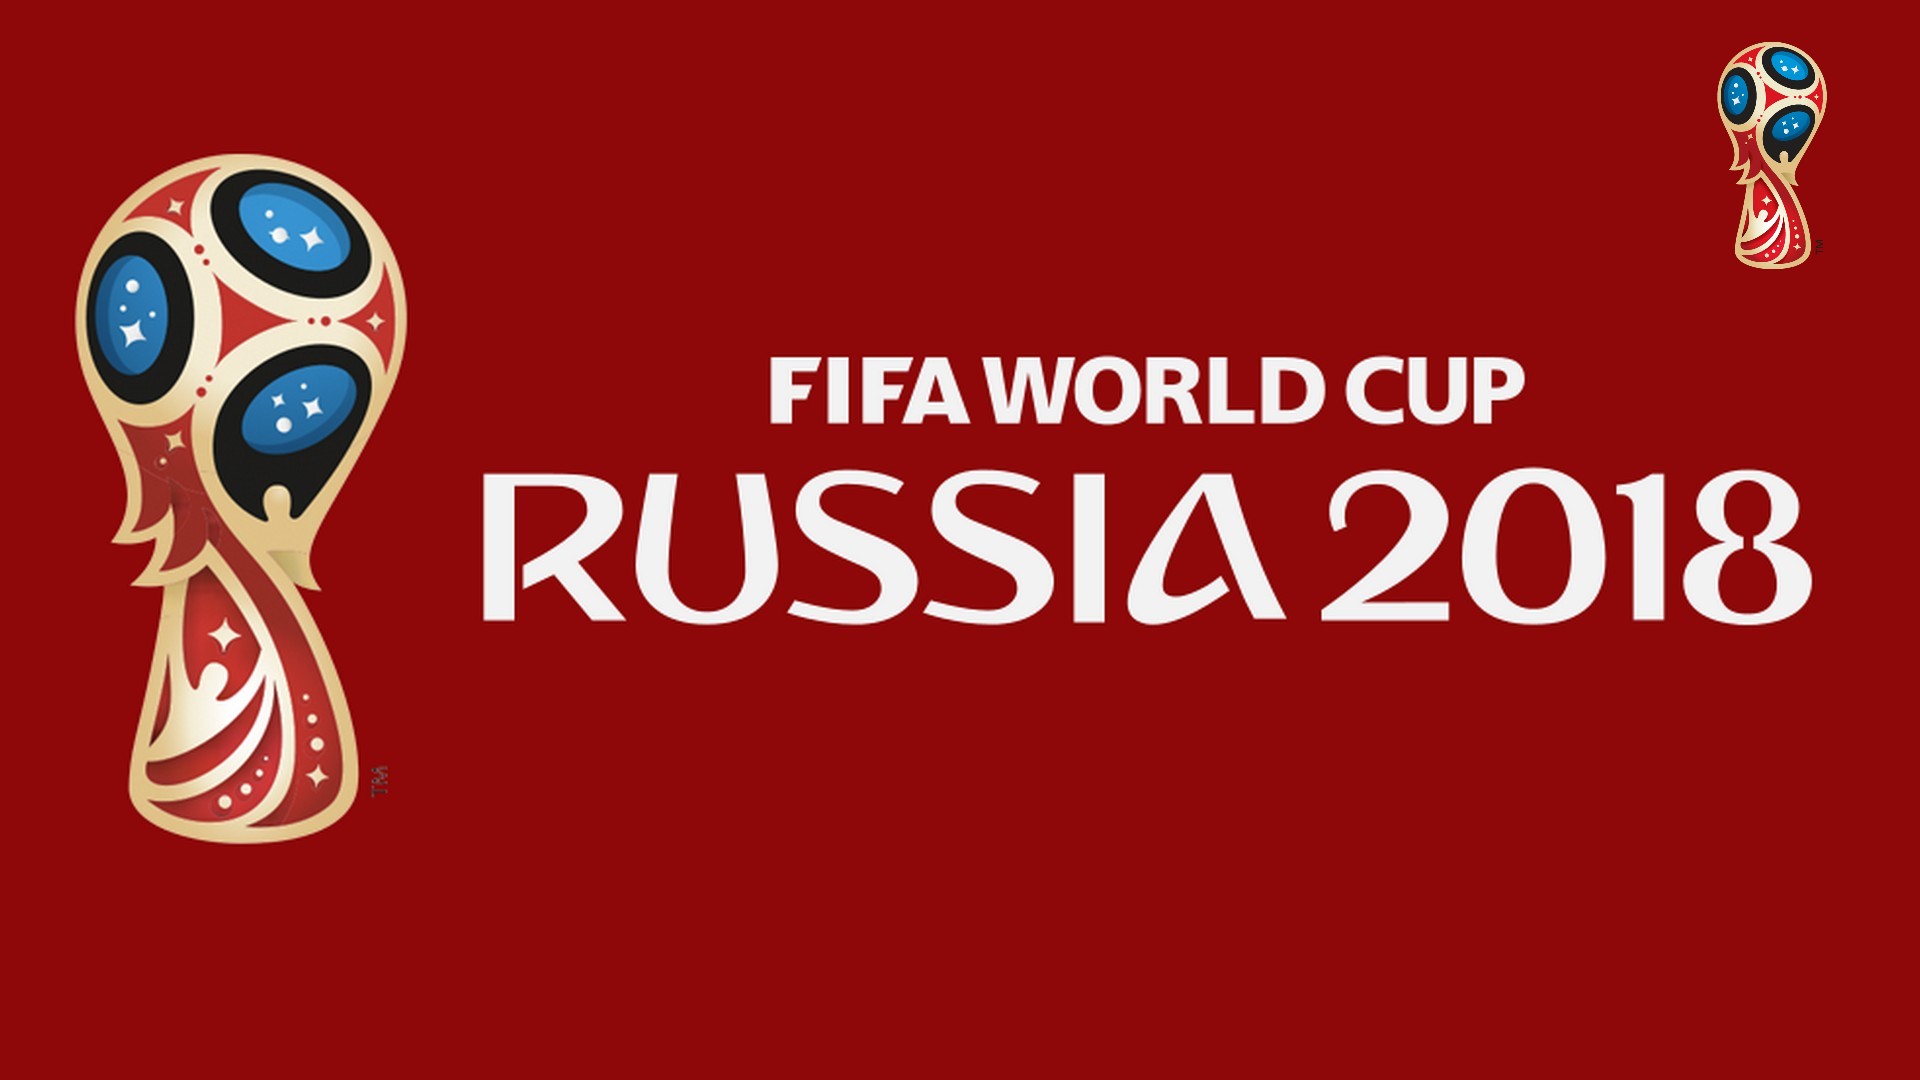 Wallpapers HD 2018 World Cup with resolution 1920x1080 pixel. You can make this wallpaper for your Mac or Windows Desktop Background, iPhone, Android or Tablet and another Smartphone device